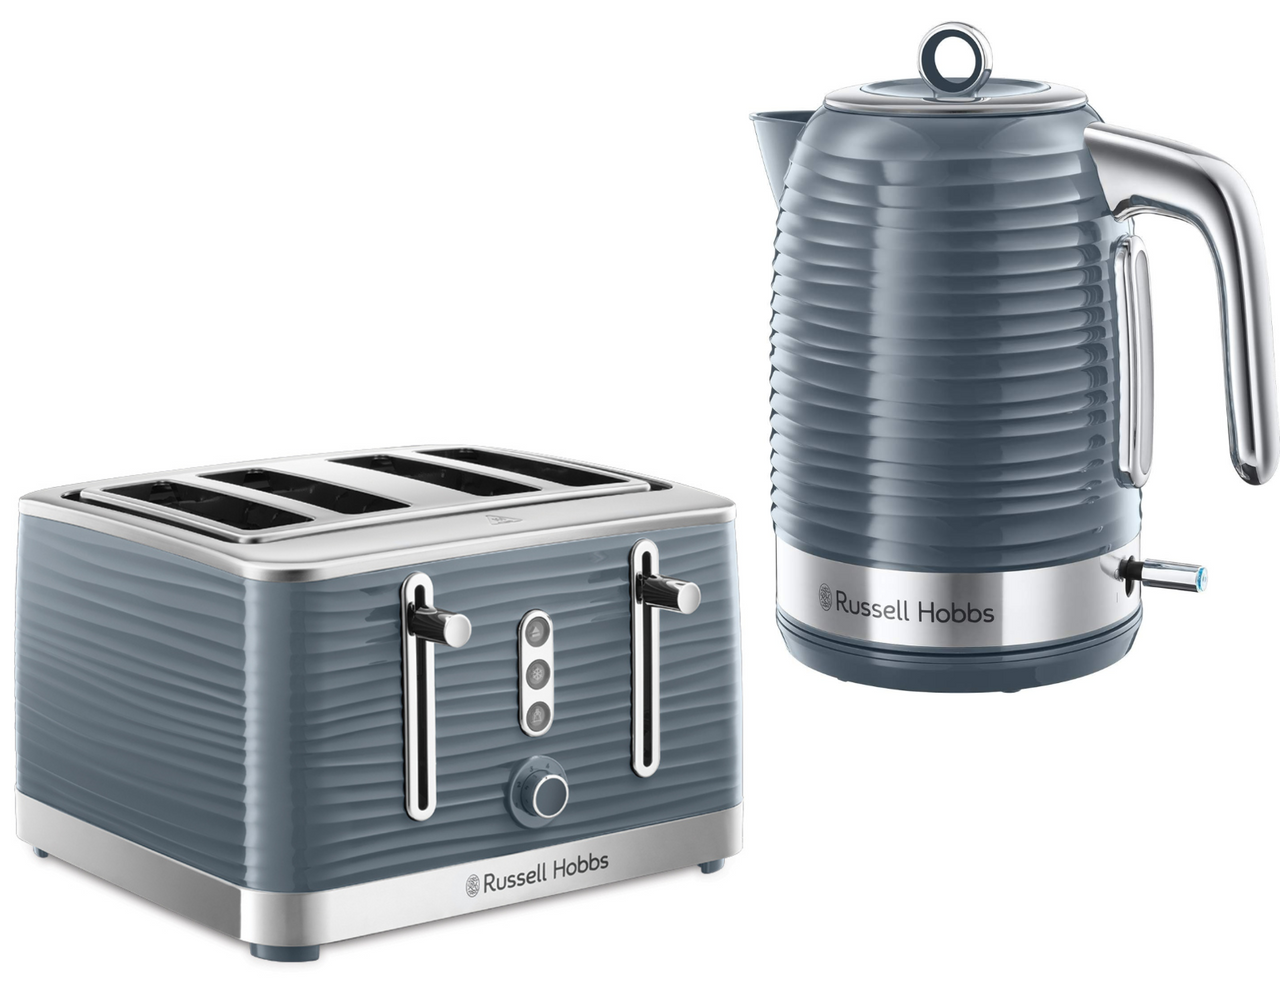 Russell Hobbs Inspire Jug Kettle & 4 Slice Toaster Matching Set in Grey & Chrome